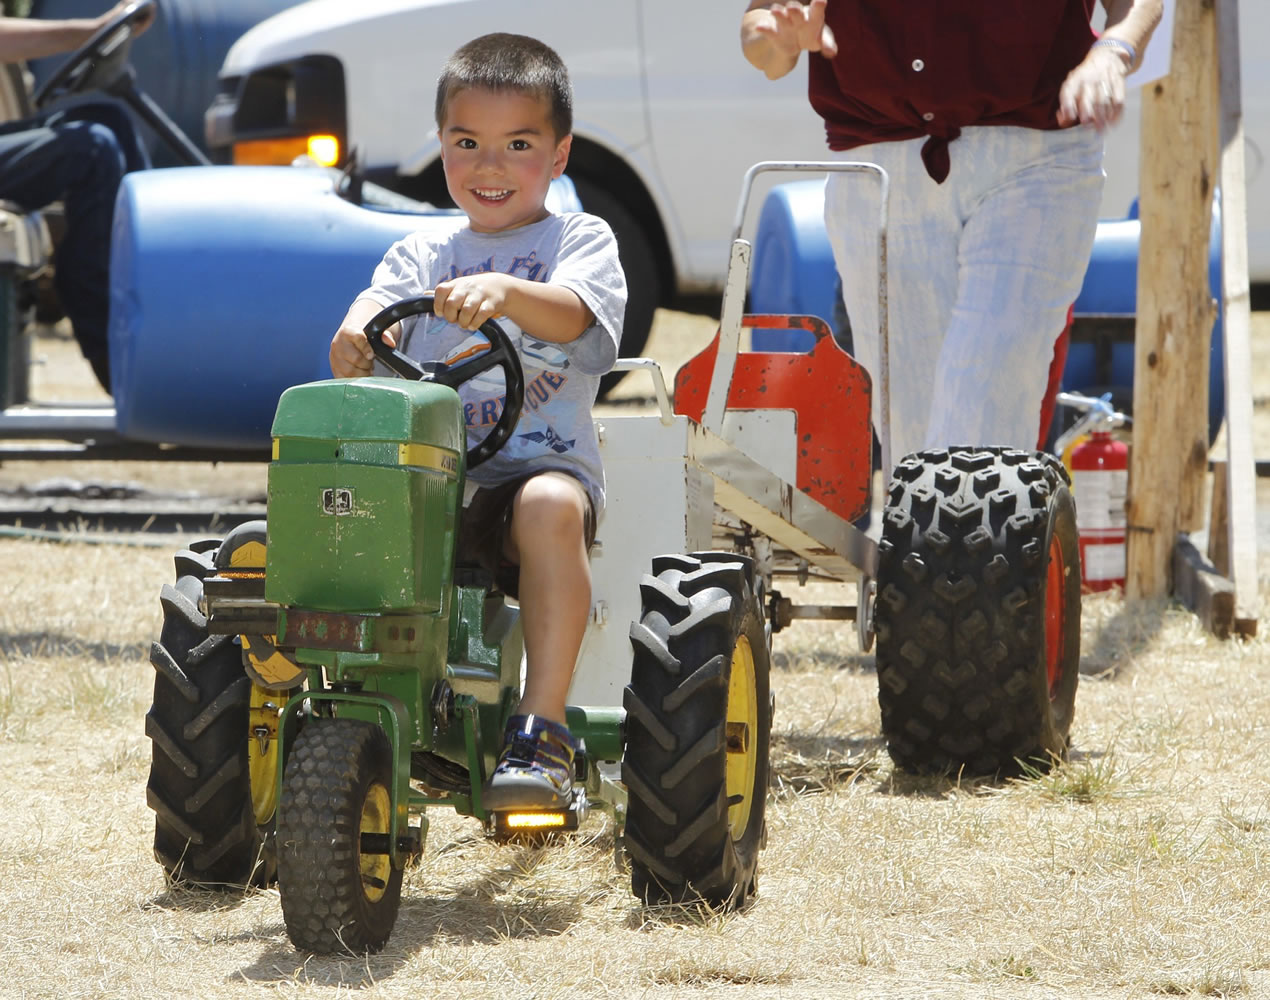 Collin Tobias, 4, of Bremerton rides a toy tractor Sunday at the Rural Heritage Fair, which took place at the Iron Ranch southeast of Ridgefield.